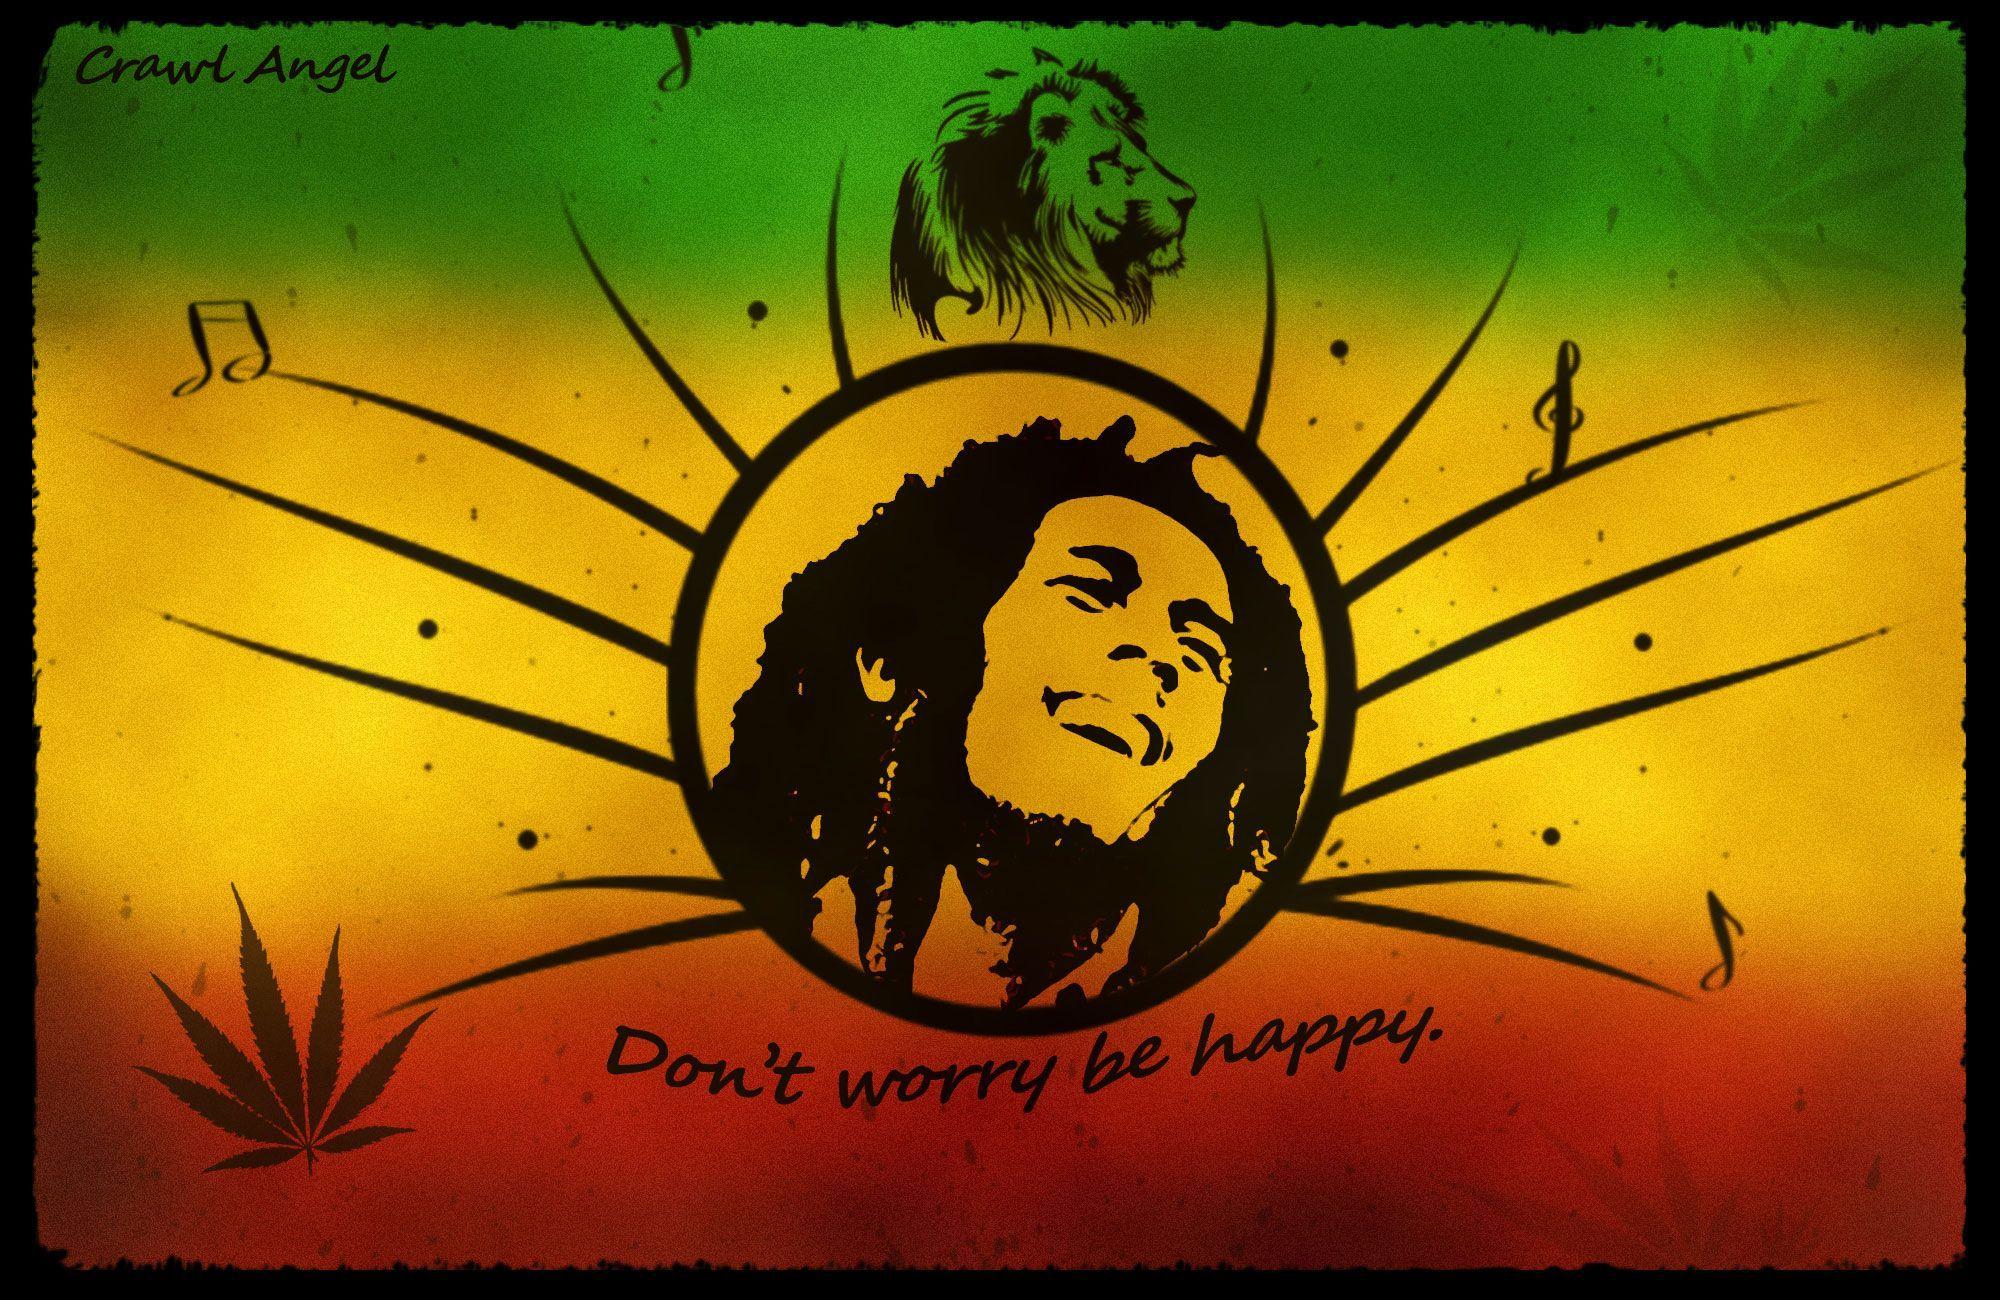 Bob Marley Wallpaper High Resolution and Quality Download. HD